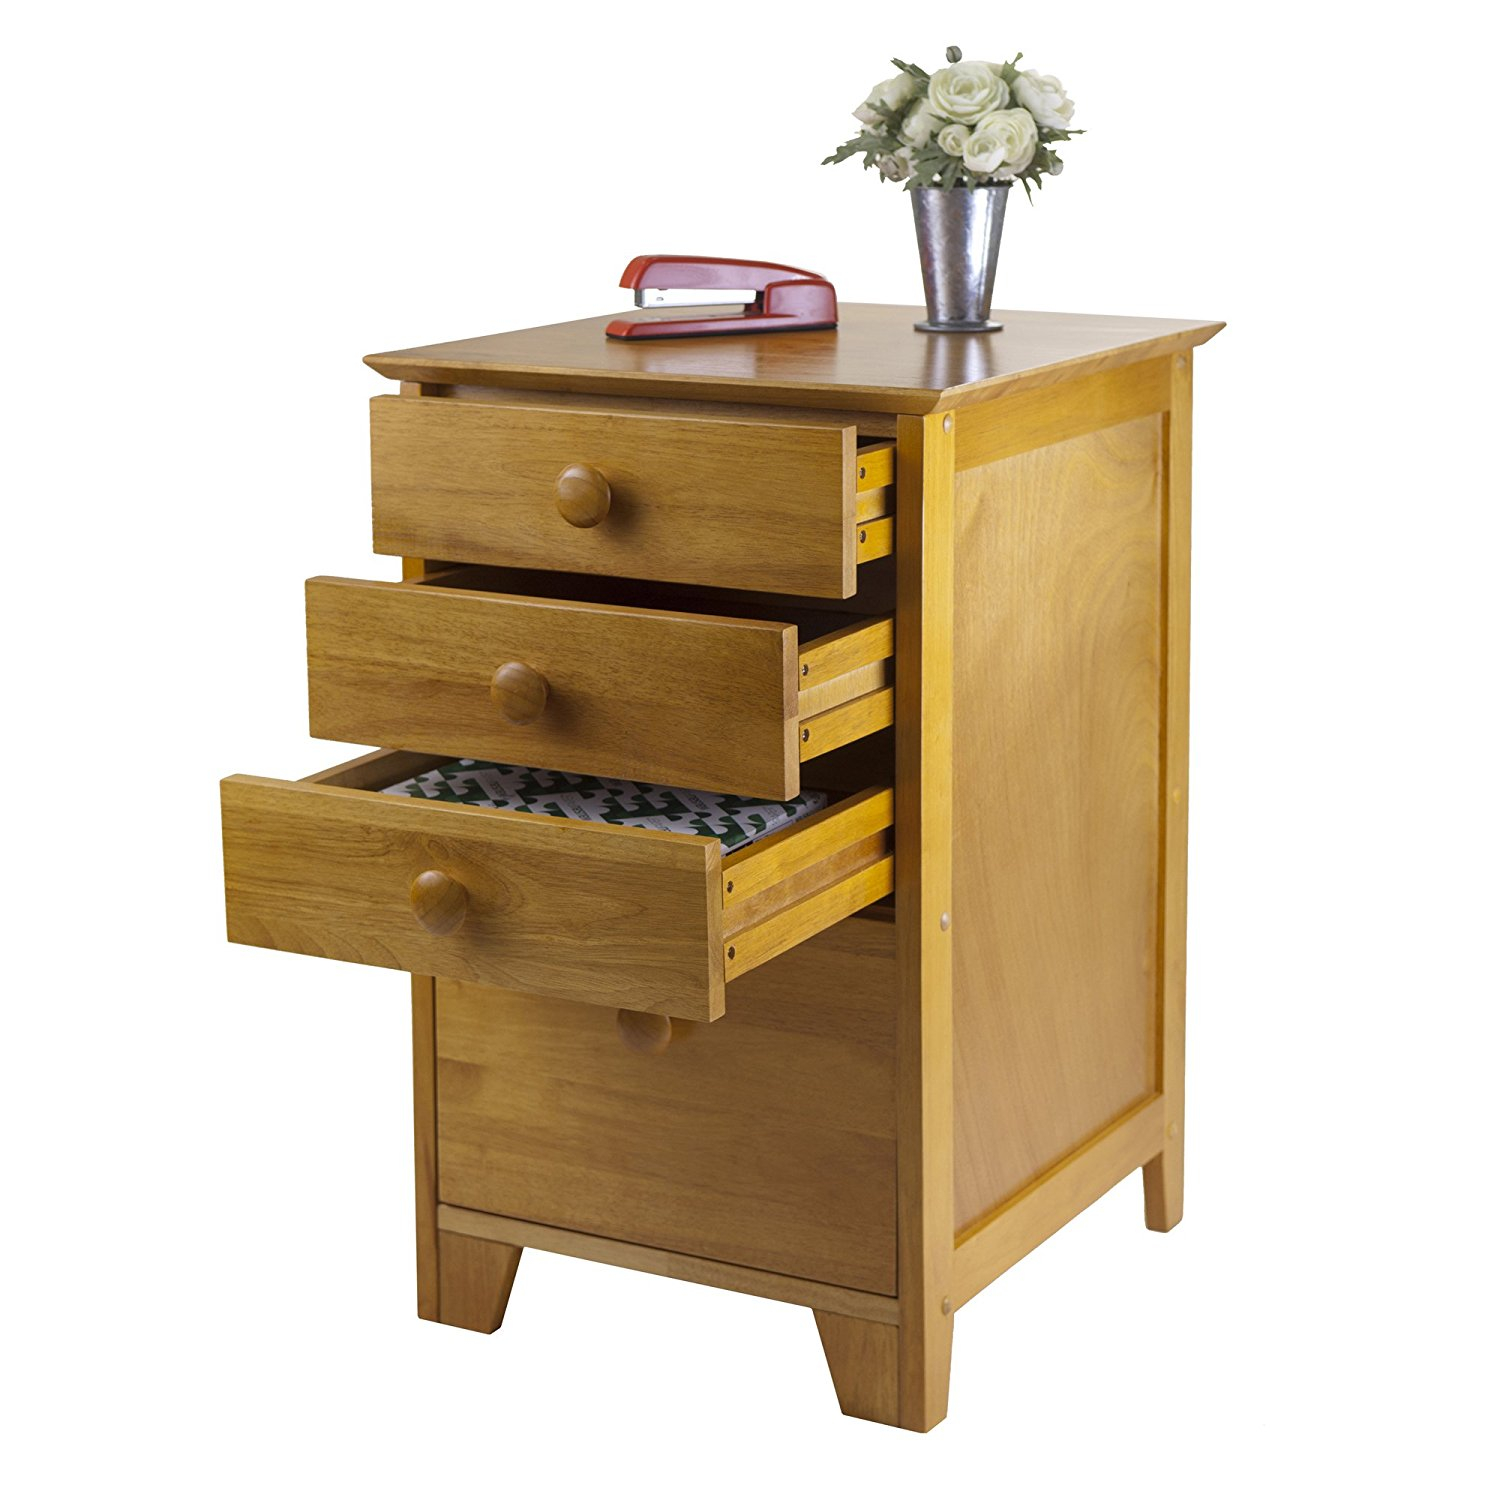 Best 4 Drawer Solid Wood Cabinet Furniture For File Organizing within size 1500 X 1500